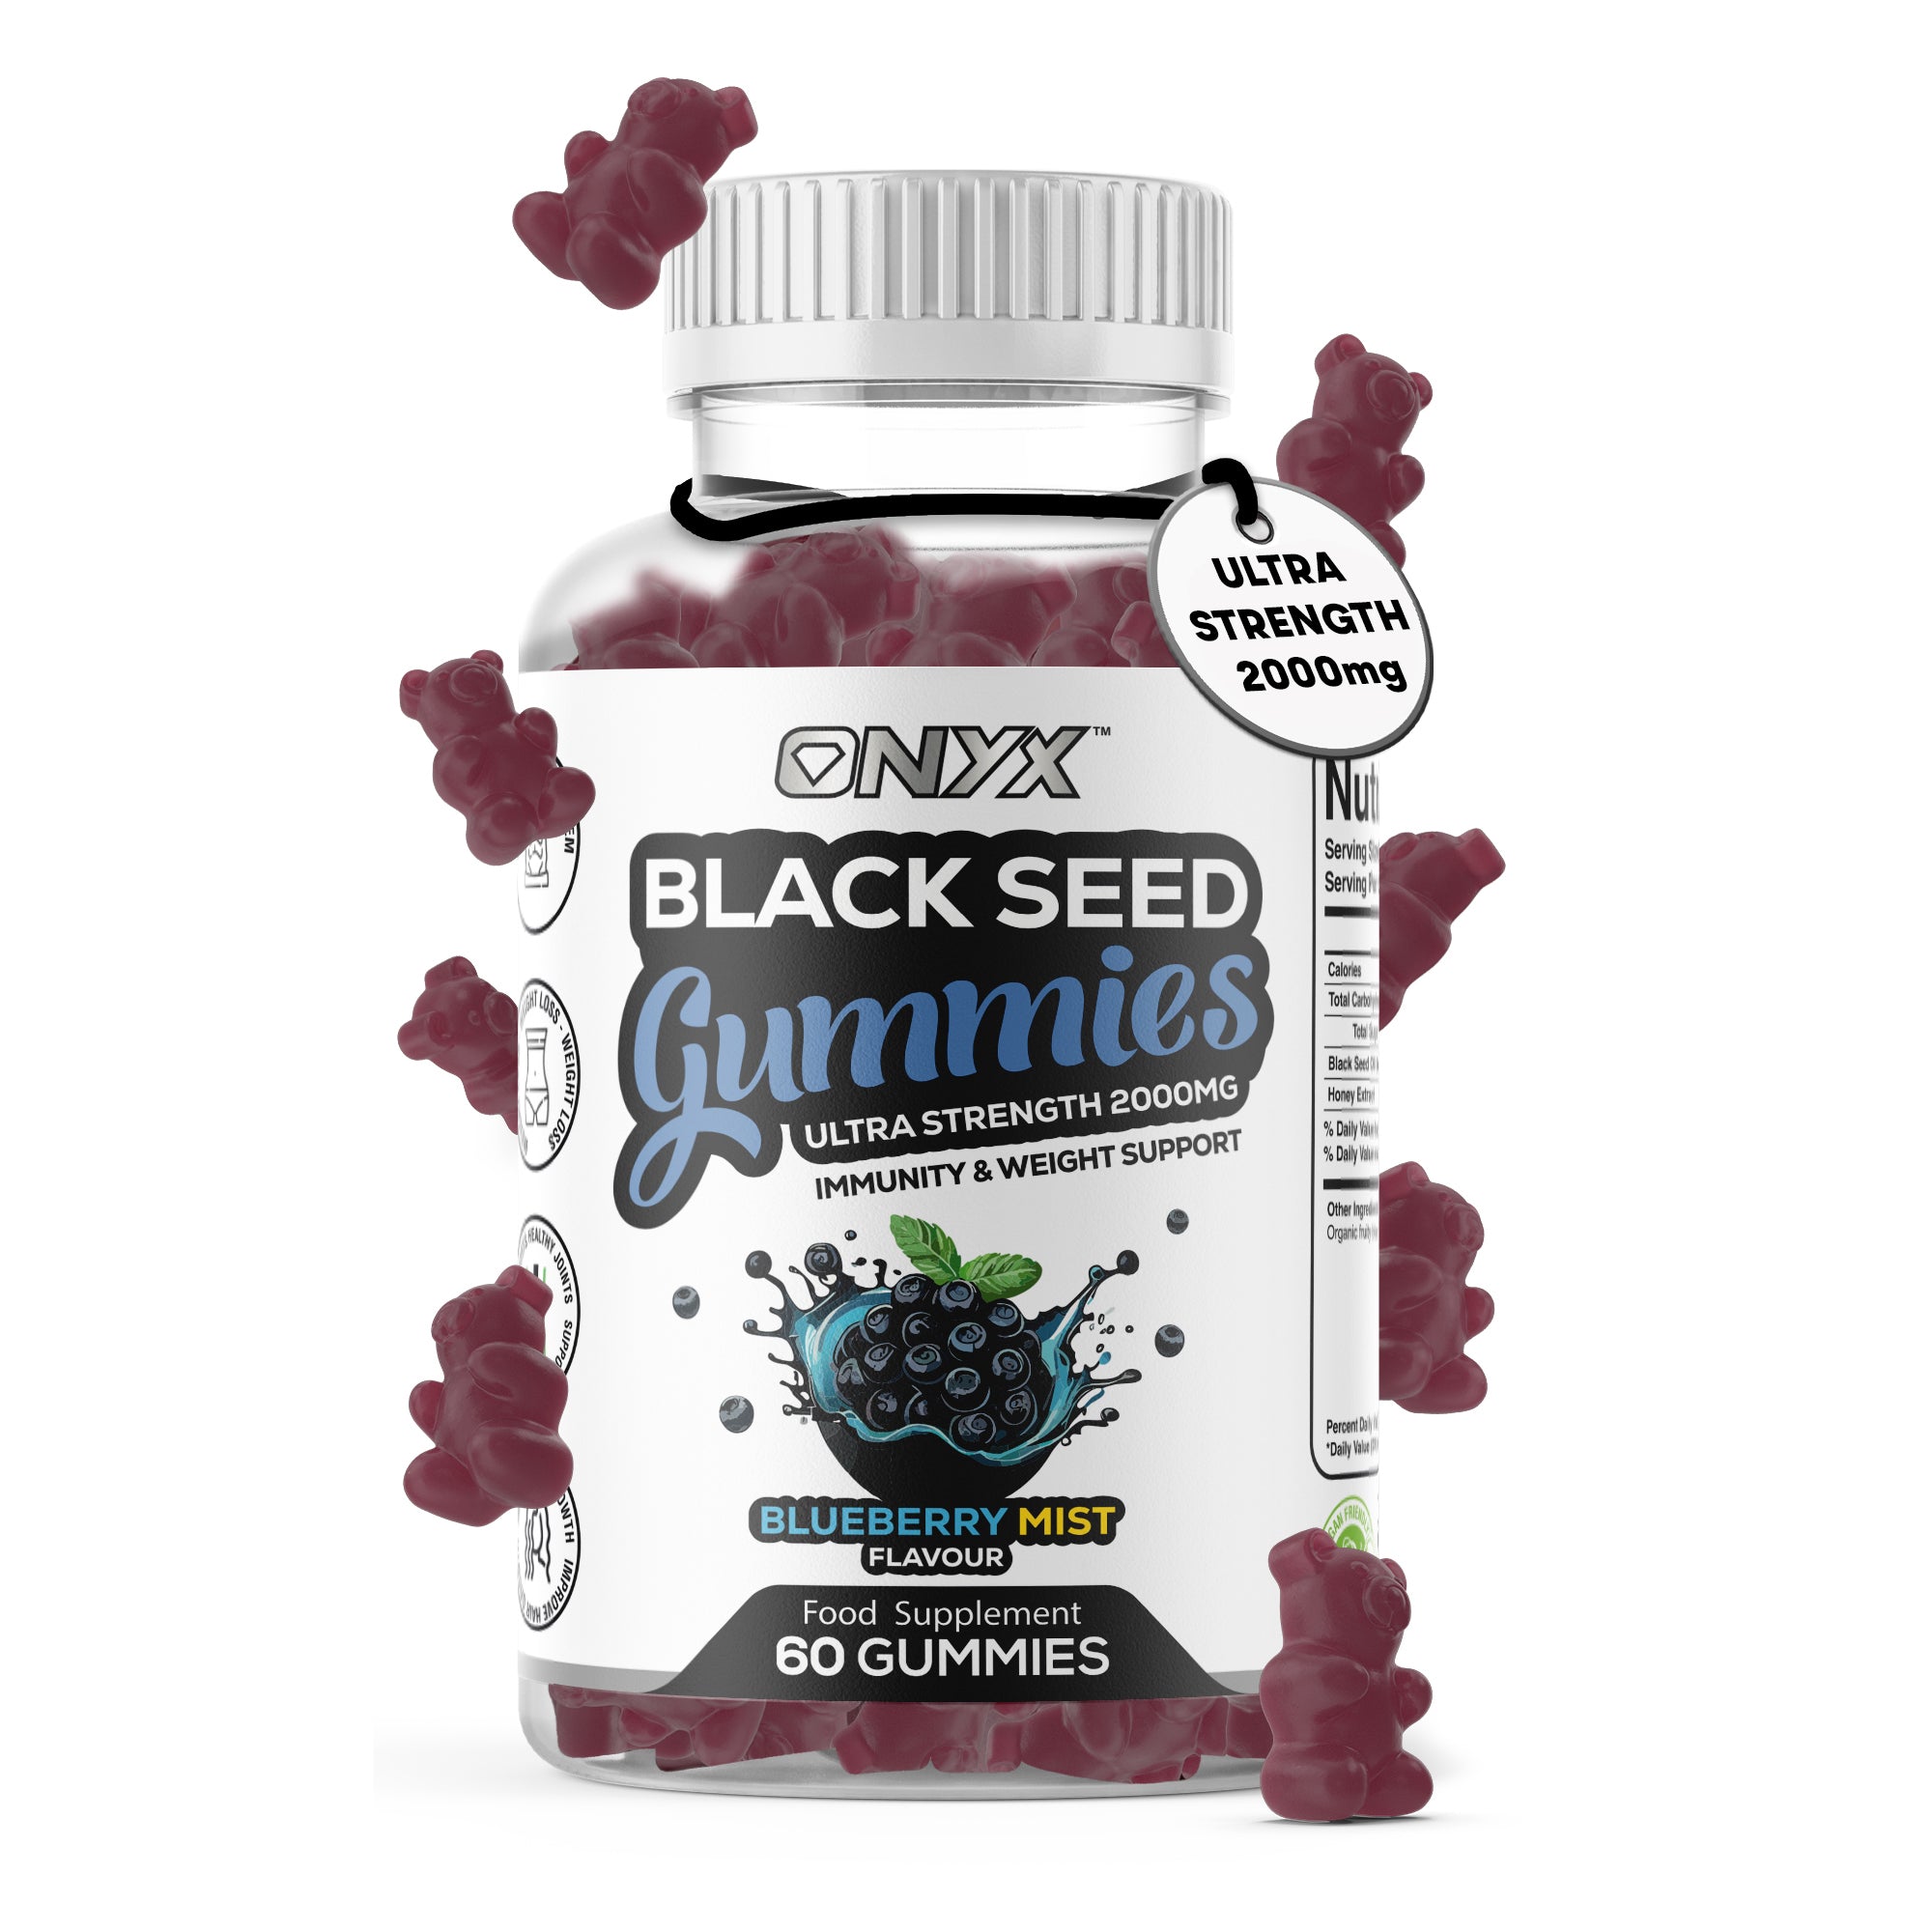 Black Seed Gummies - Ultra Strength 2000mg - Immunity & Weight Support